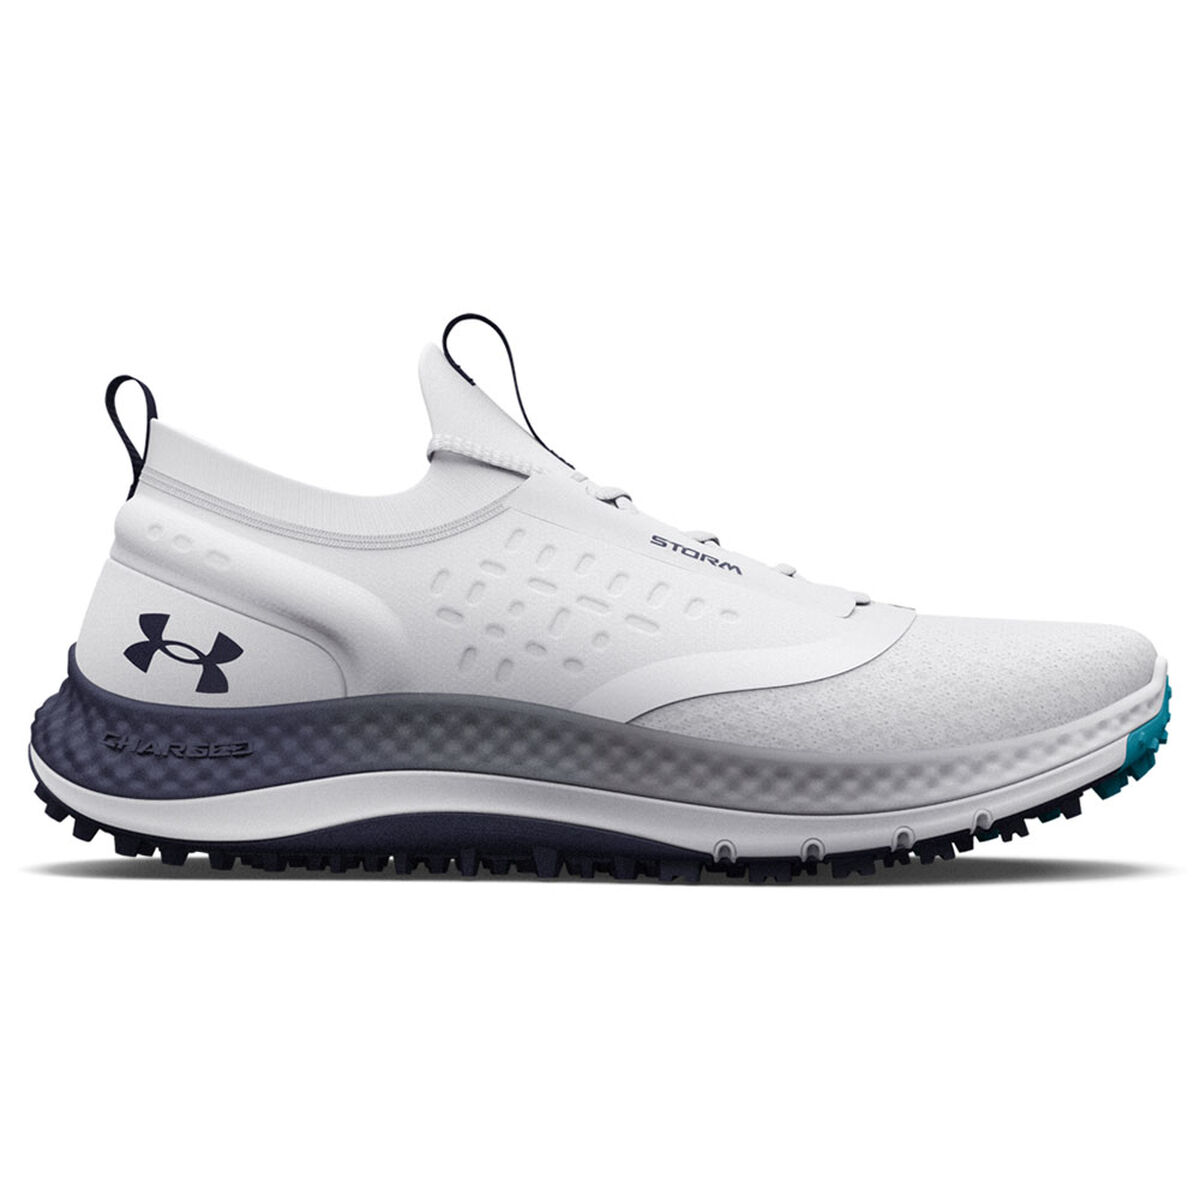 Under Armour Men’s Charged Phantom Spikeless Golf Shoes, Mens, White/white/navy, 8 | American Golf